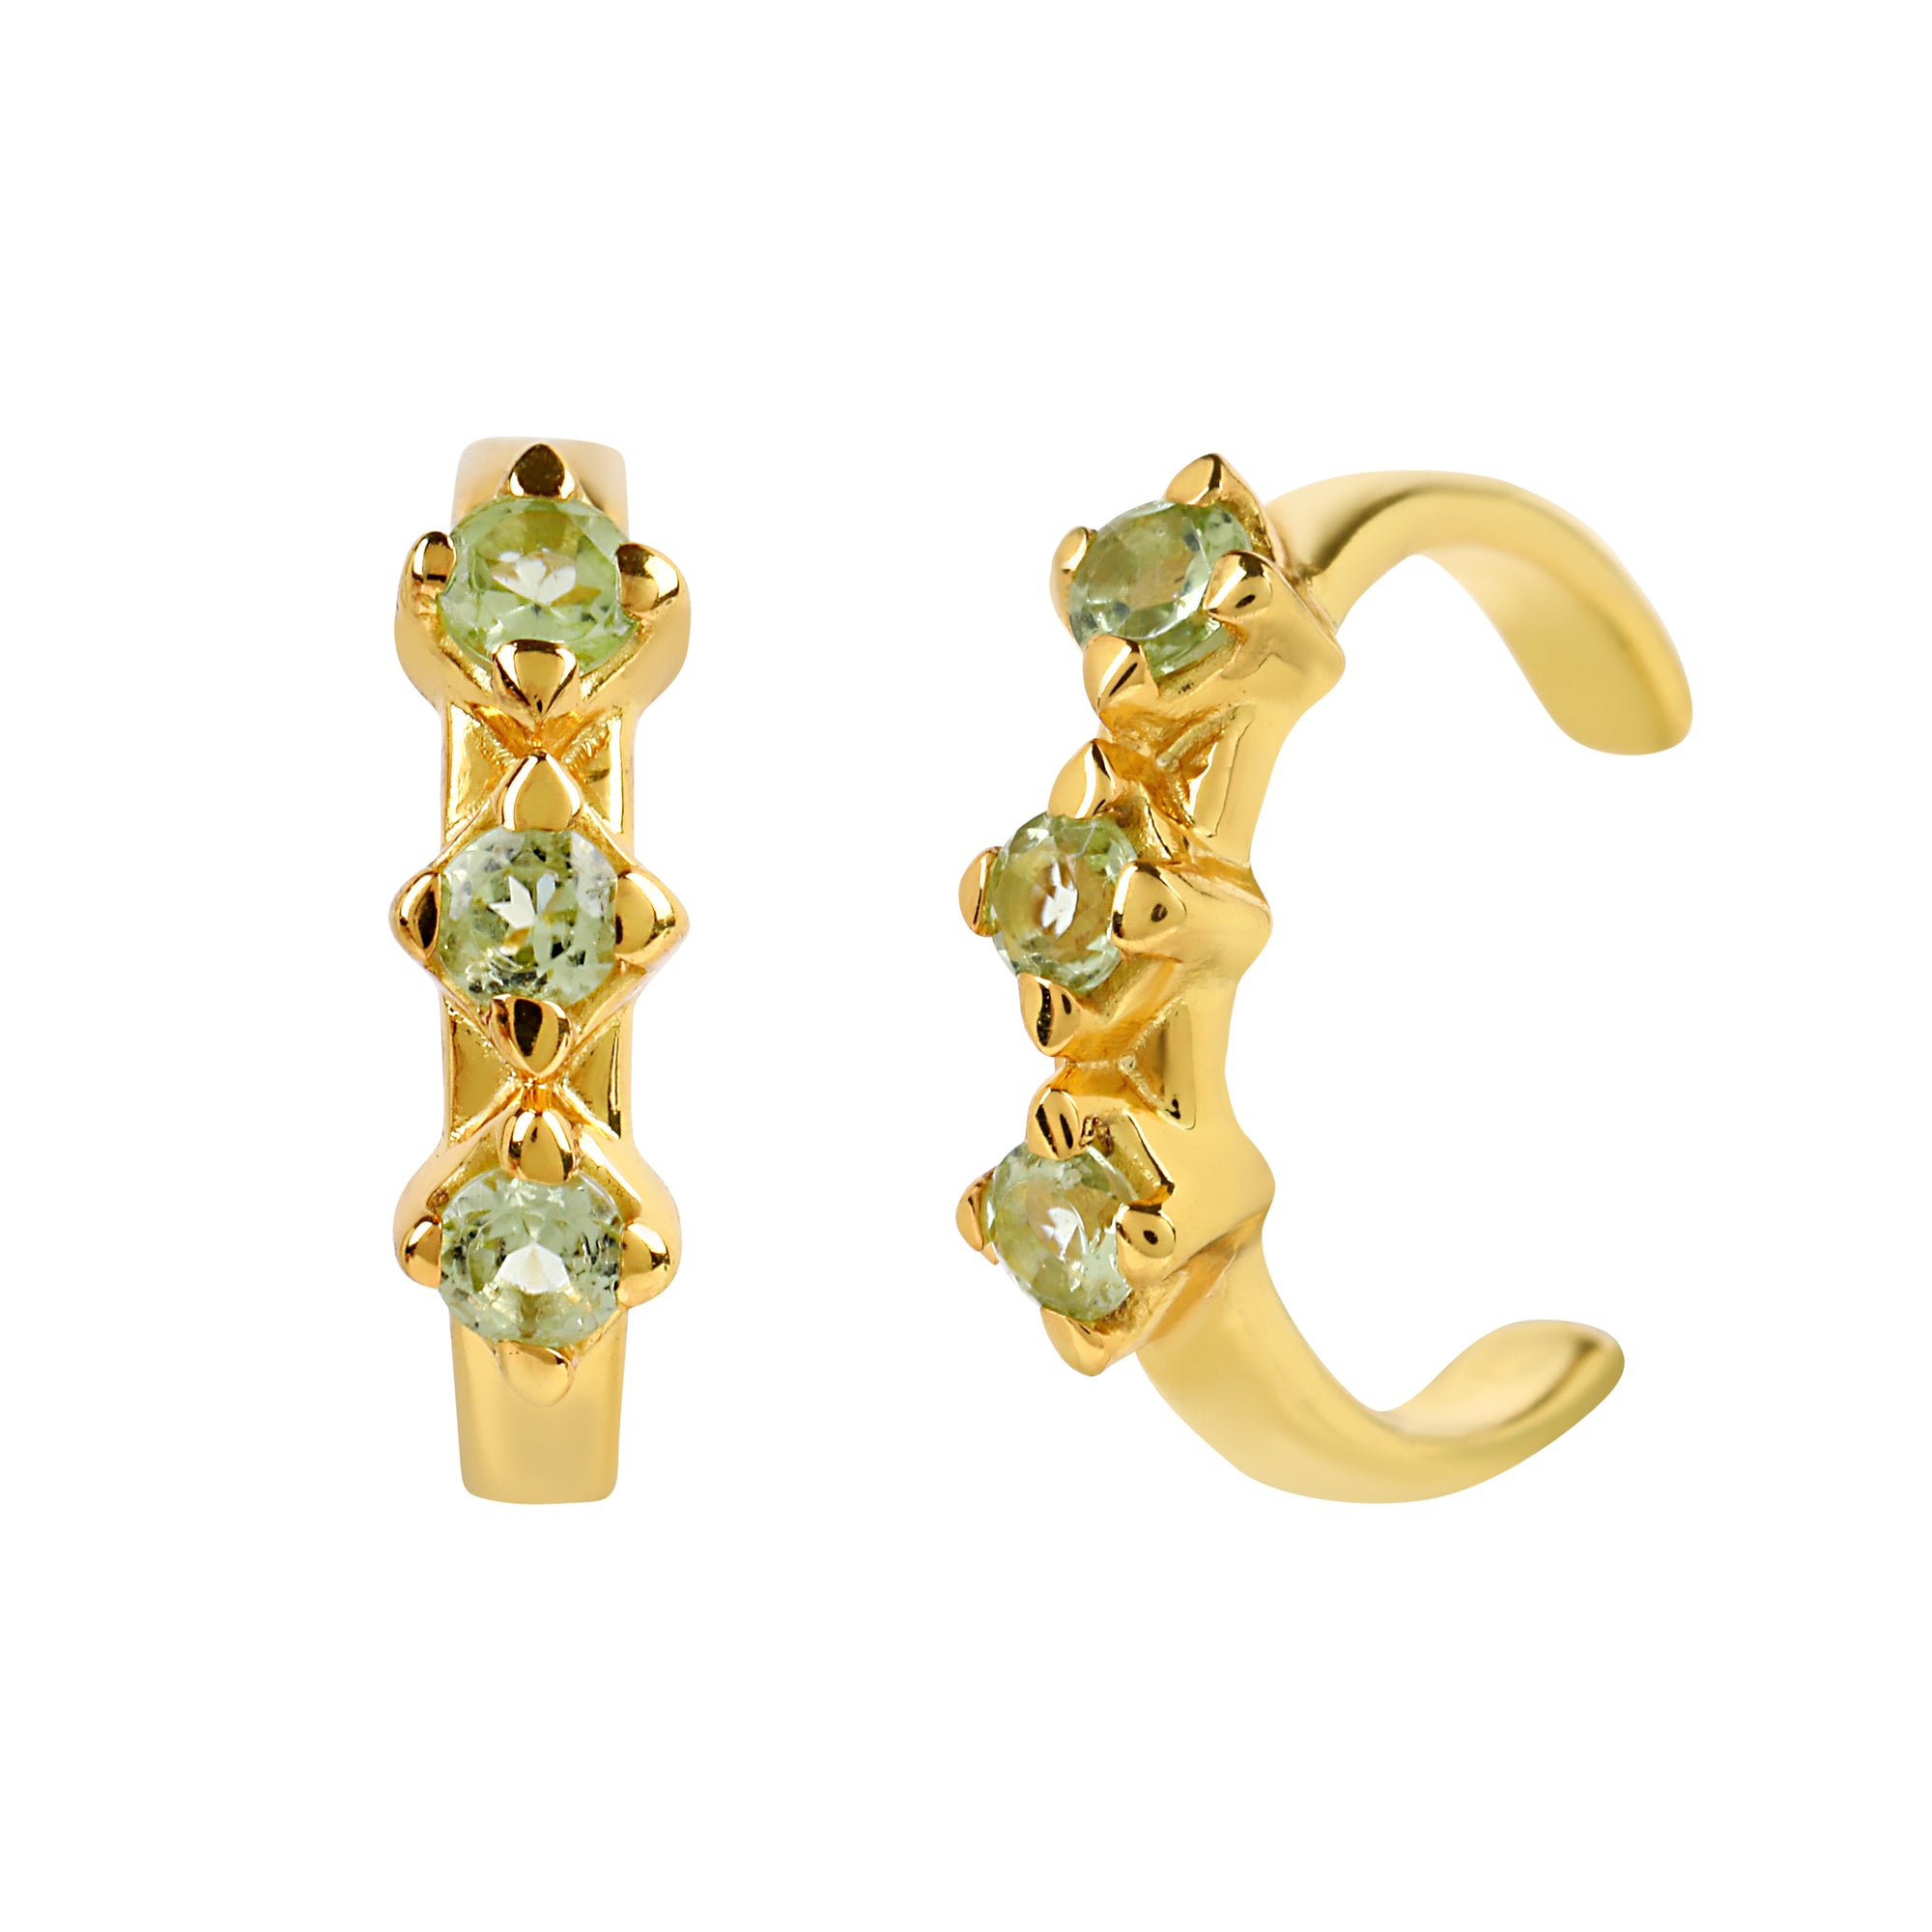 Reconceptions Ear Cuffs - Gold - Green